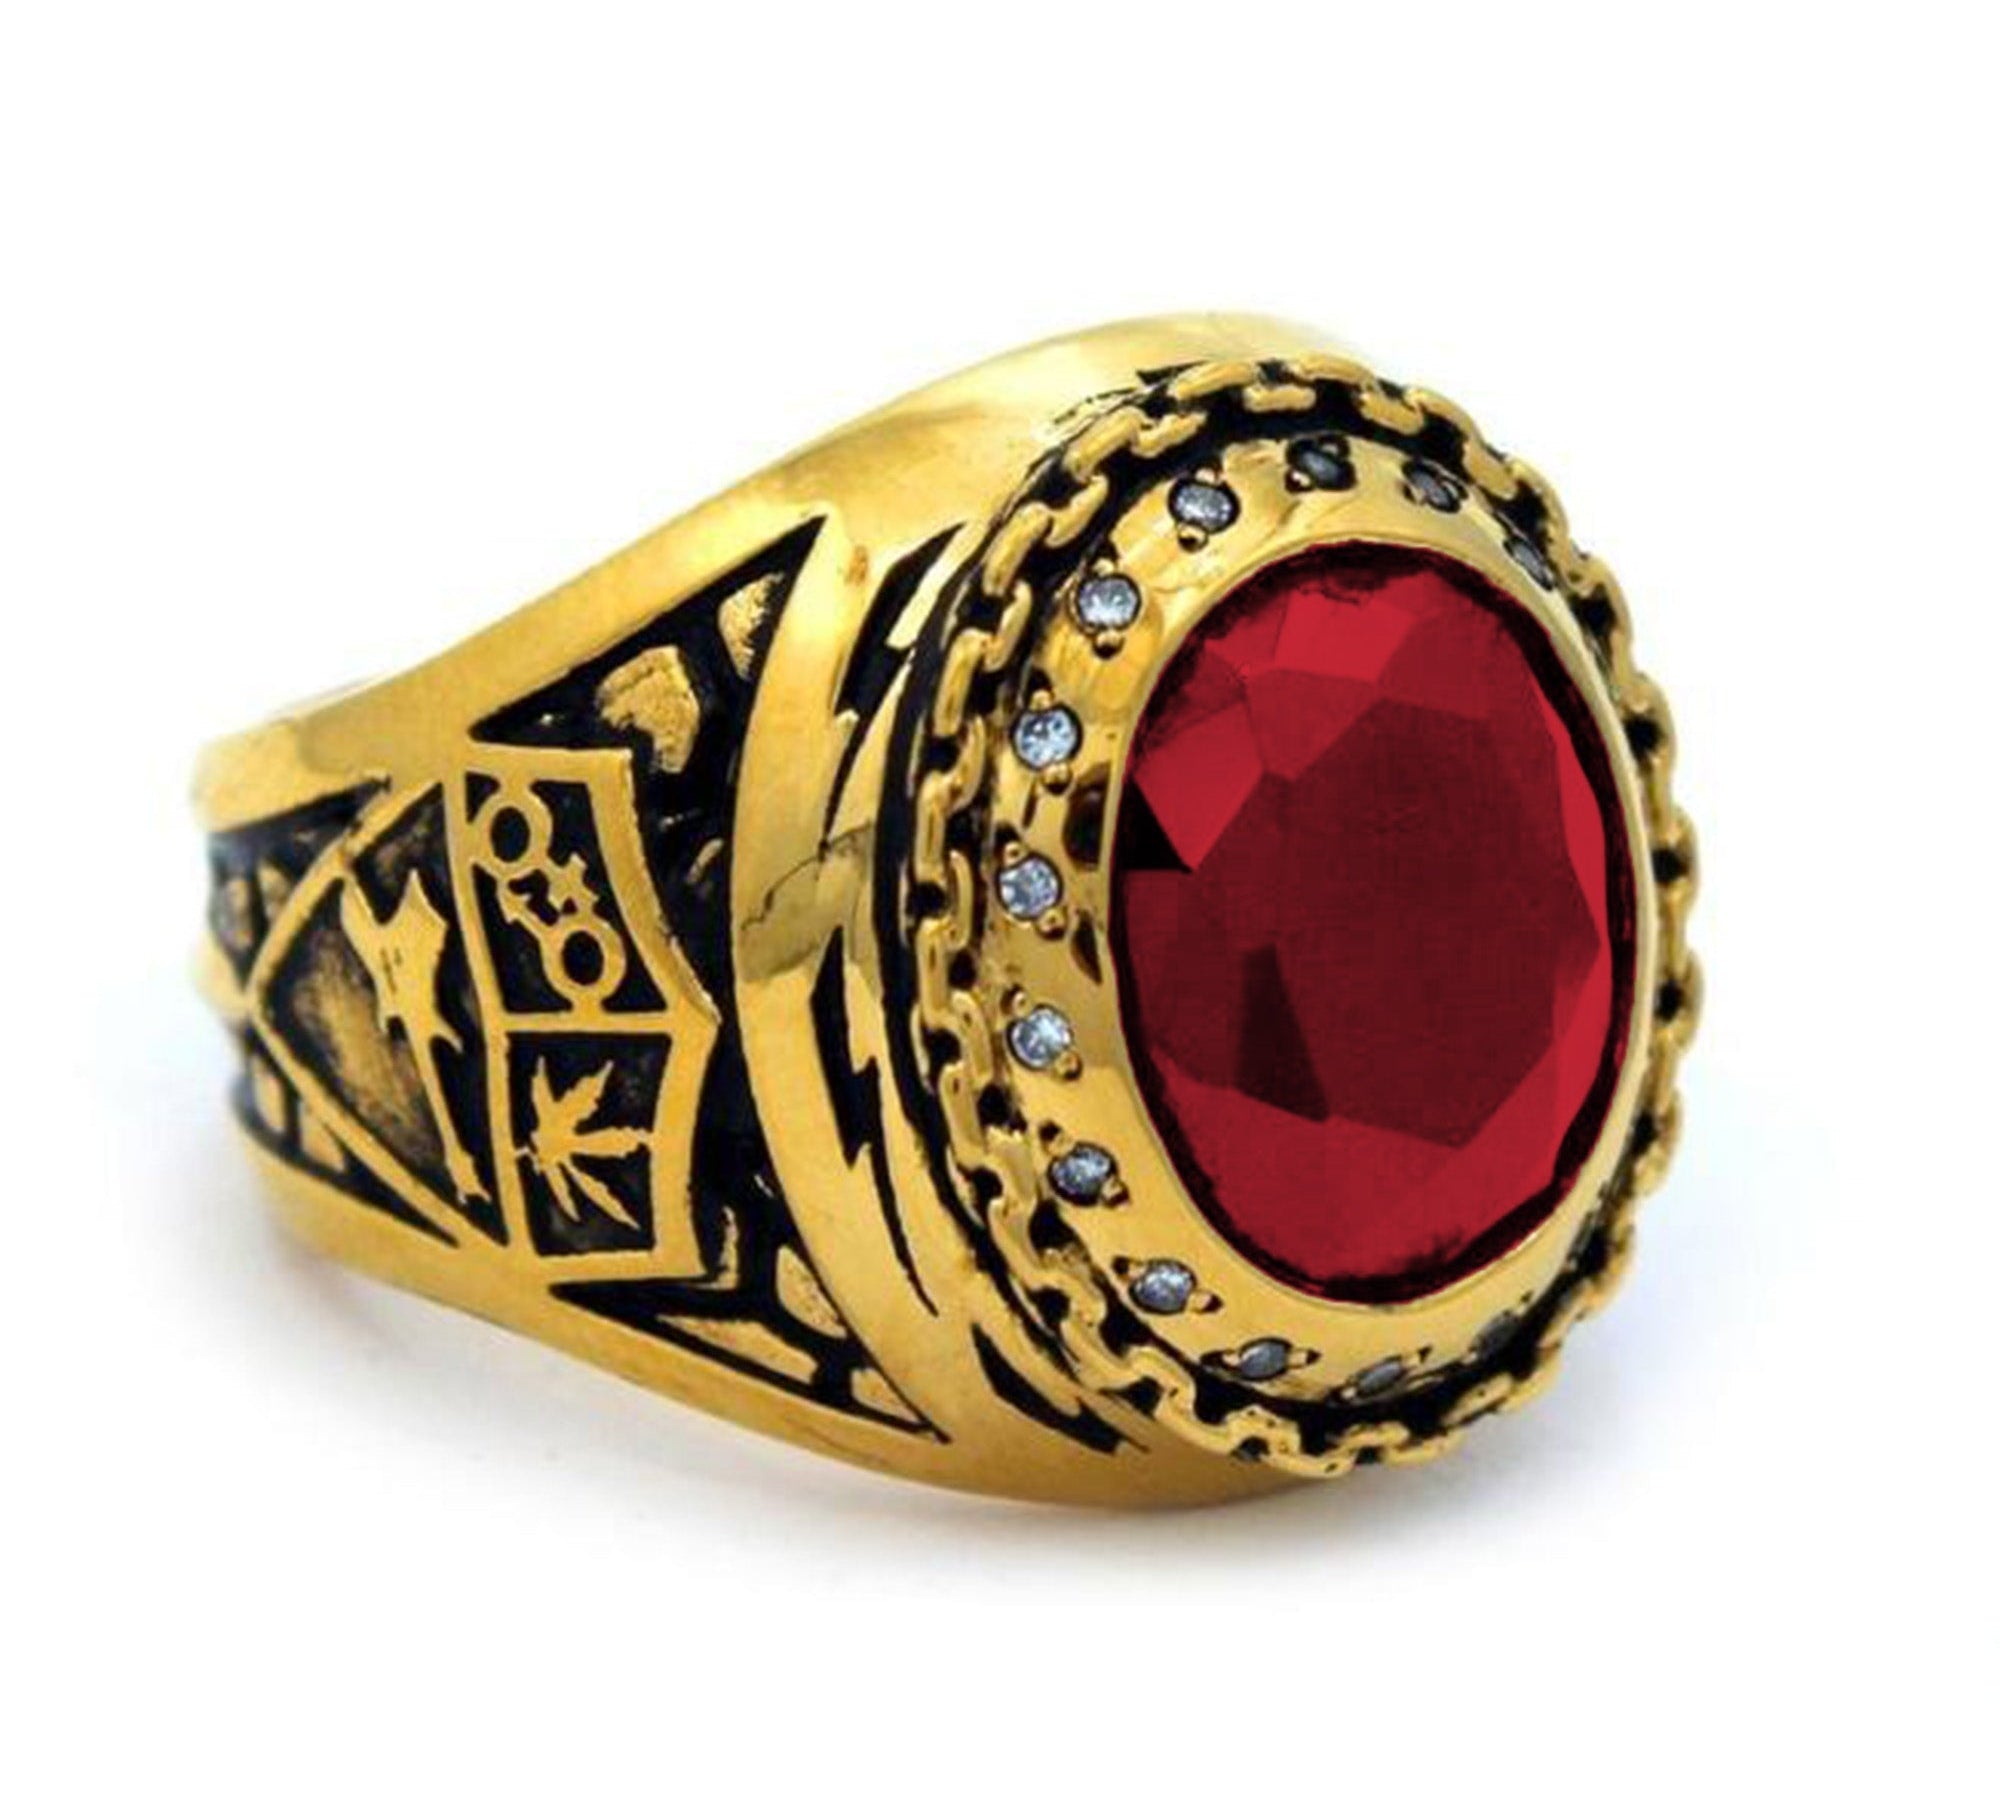 His No Class Ring pm rings Precious Metals Vermeil - 24k Gold Plated 9 Red